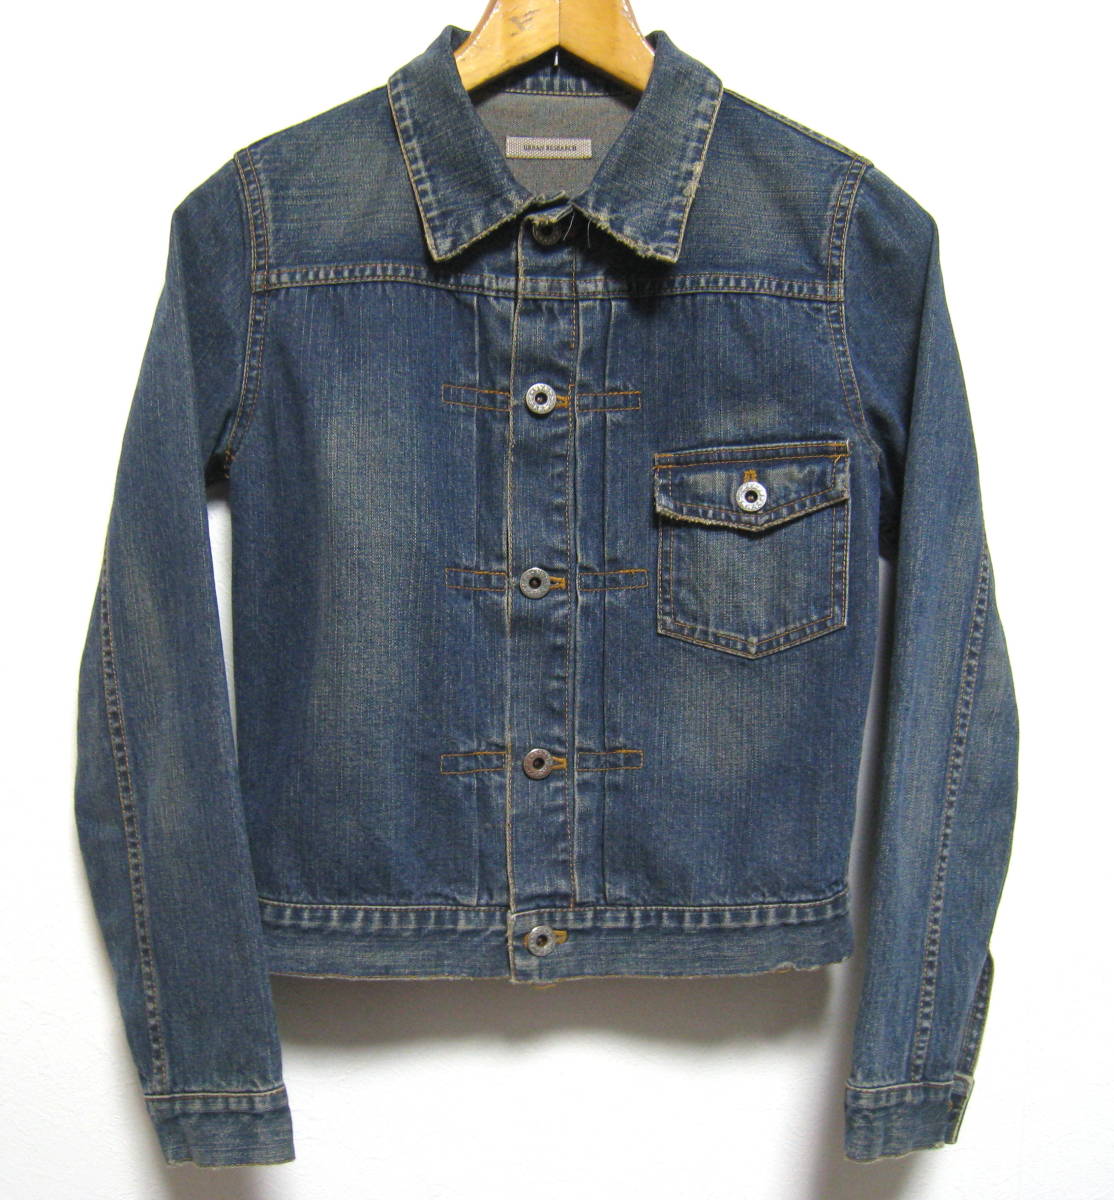 URBAN RESEARCH# Urban Research Vintage manner Denim jacket 1st model type manner G Jean lady's size 38 made in Japan 